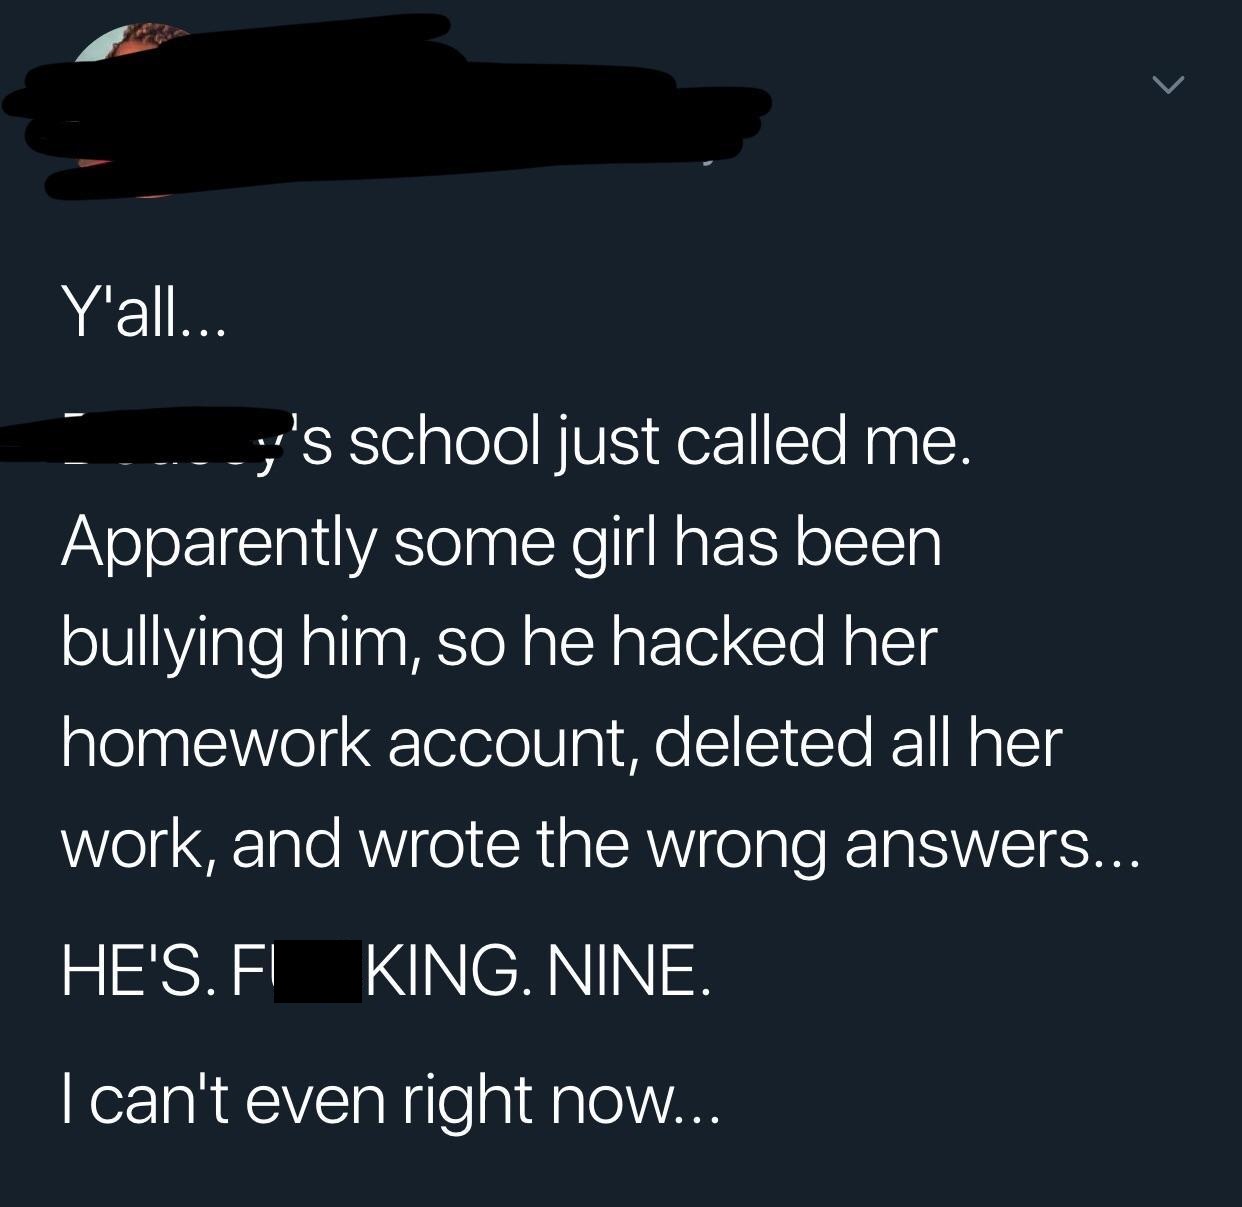 incentive - S Y'all... y 's school just called me. Apparently some girl has been bullying him, so he hacked her homework account, deleted all her work, and wrote the wrong answers... He'S. Fl King. Nine. I can't even right now...